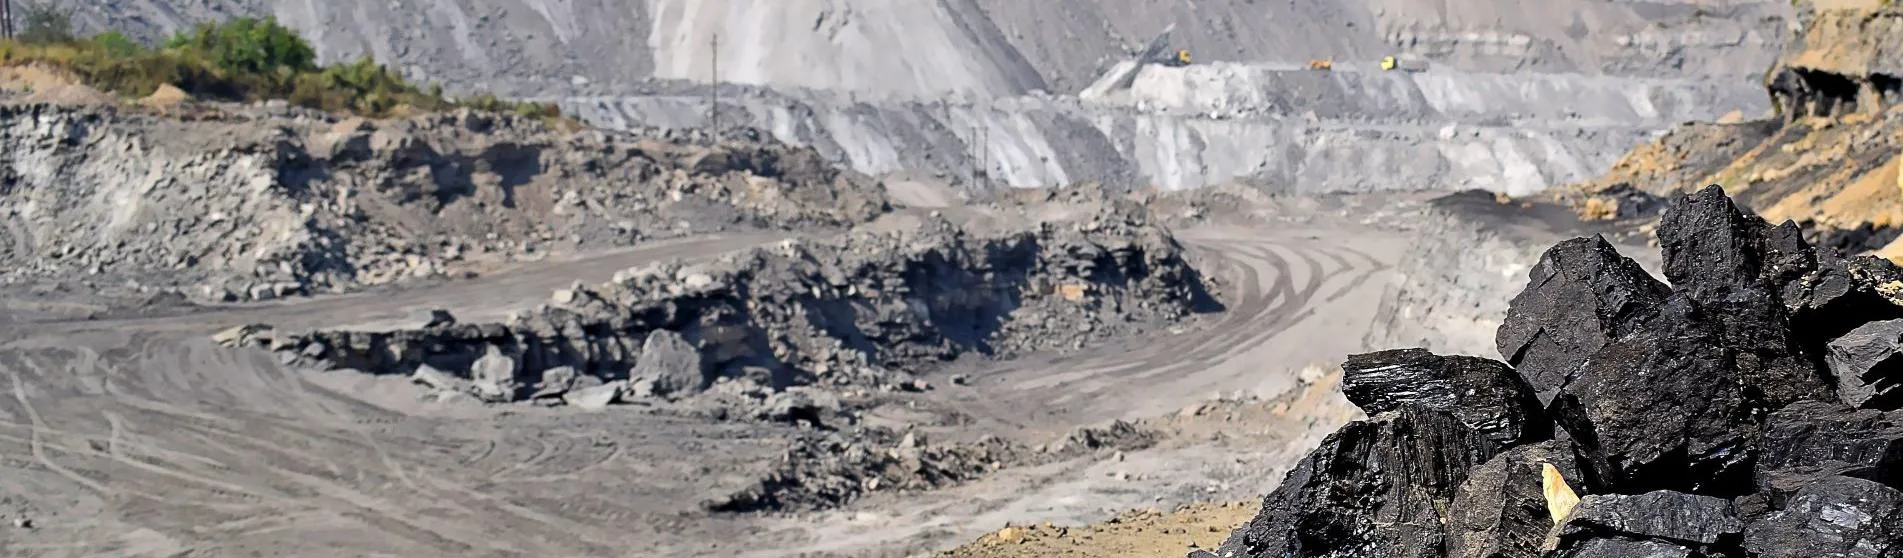 Coal mining project, West Bengal